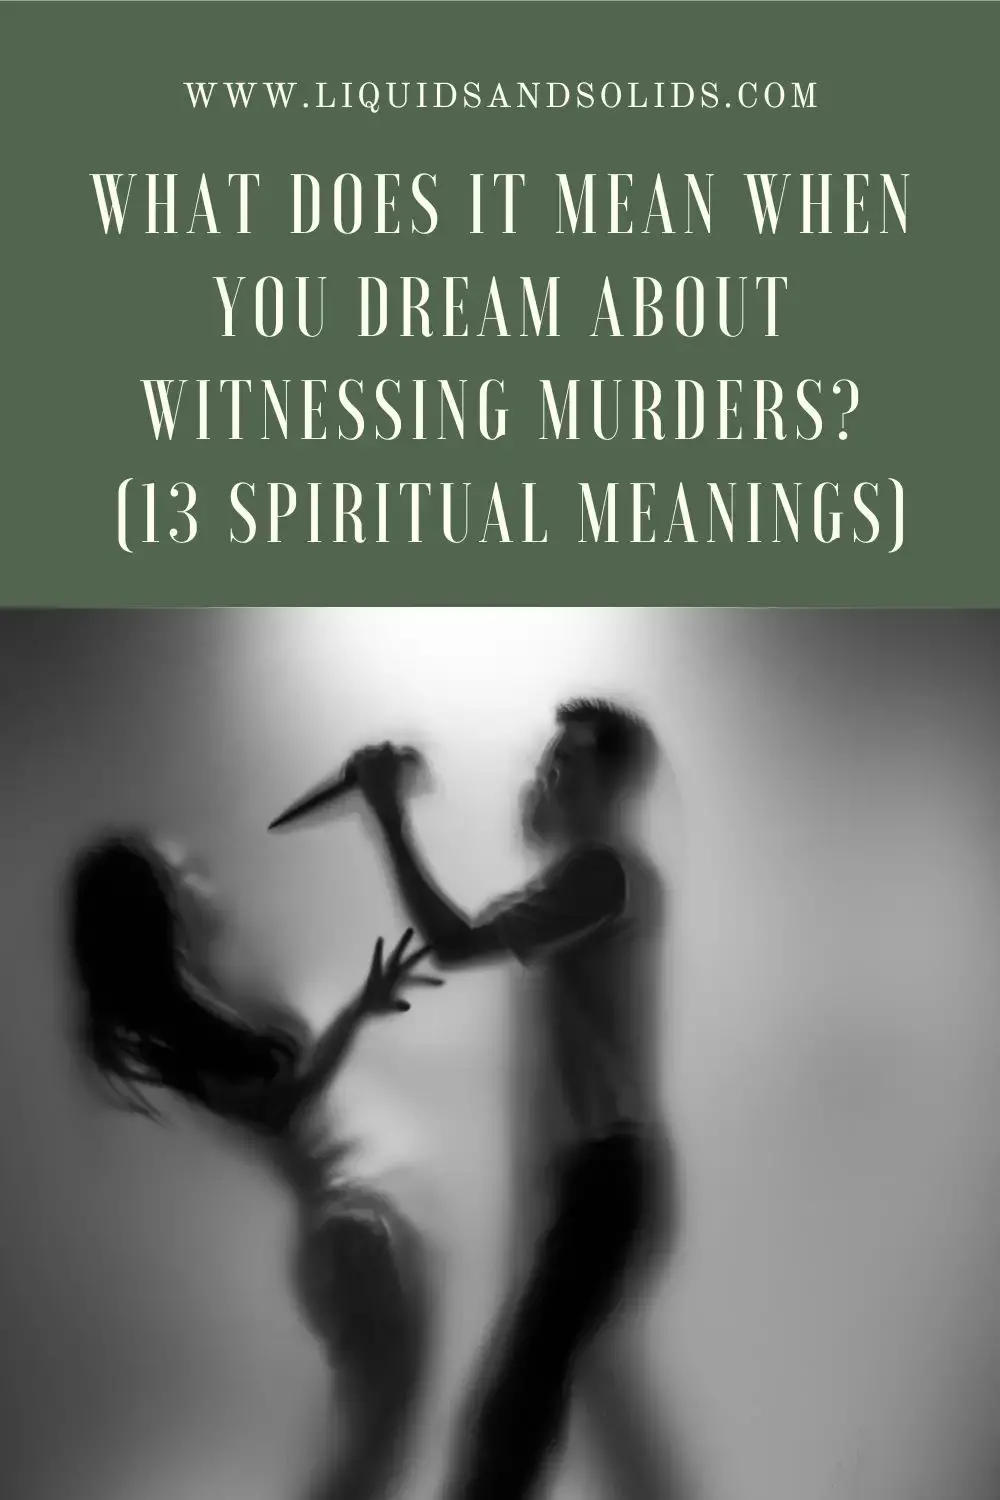 What Does It Mean When You Dream Of Being Killed?